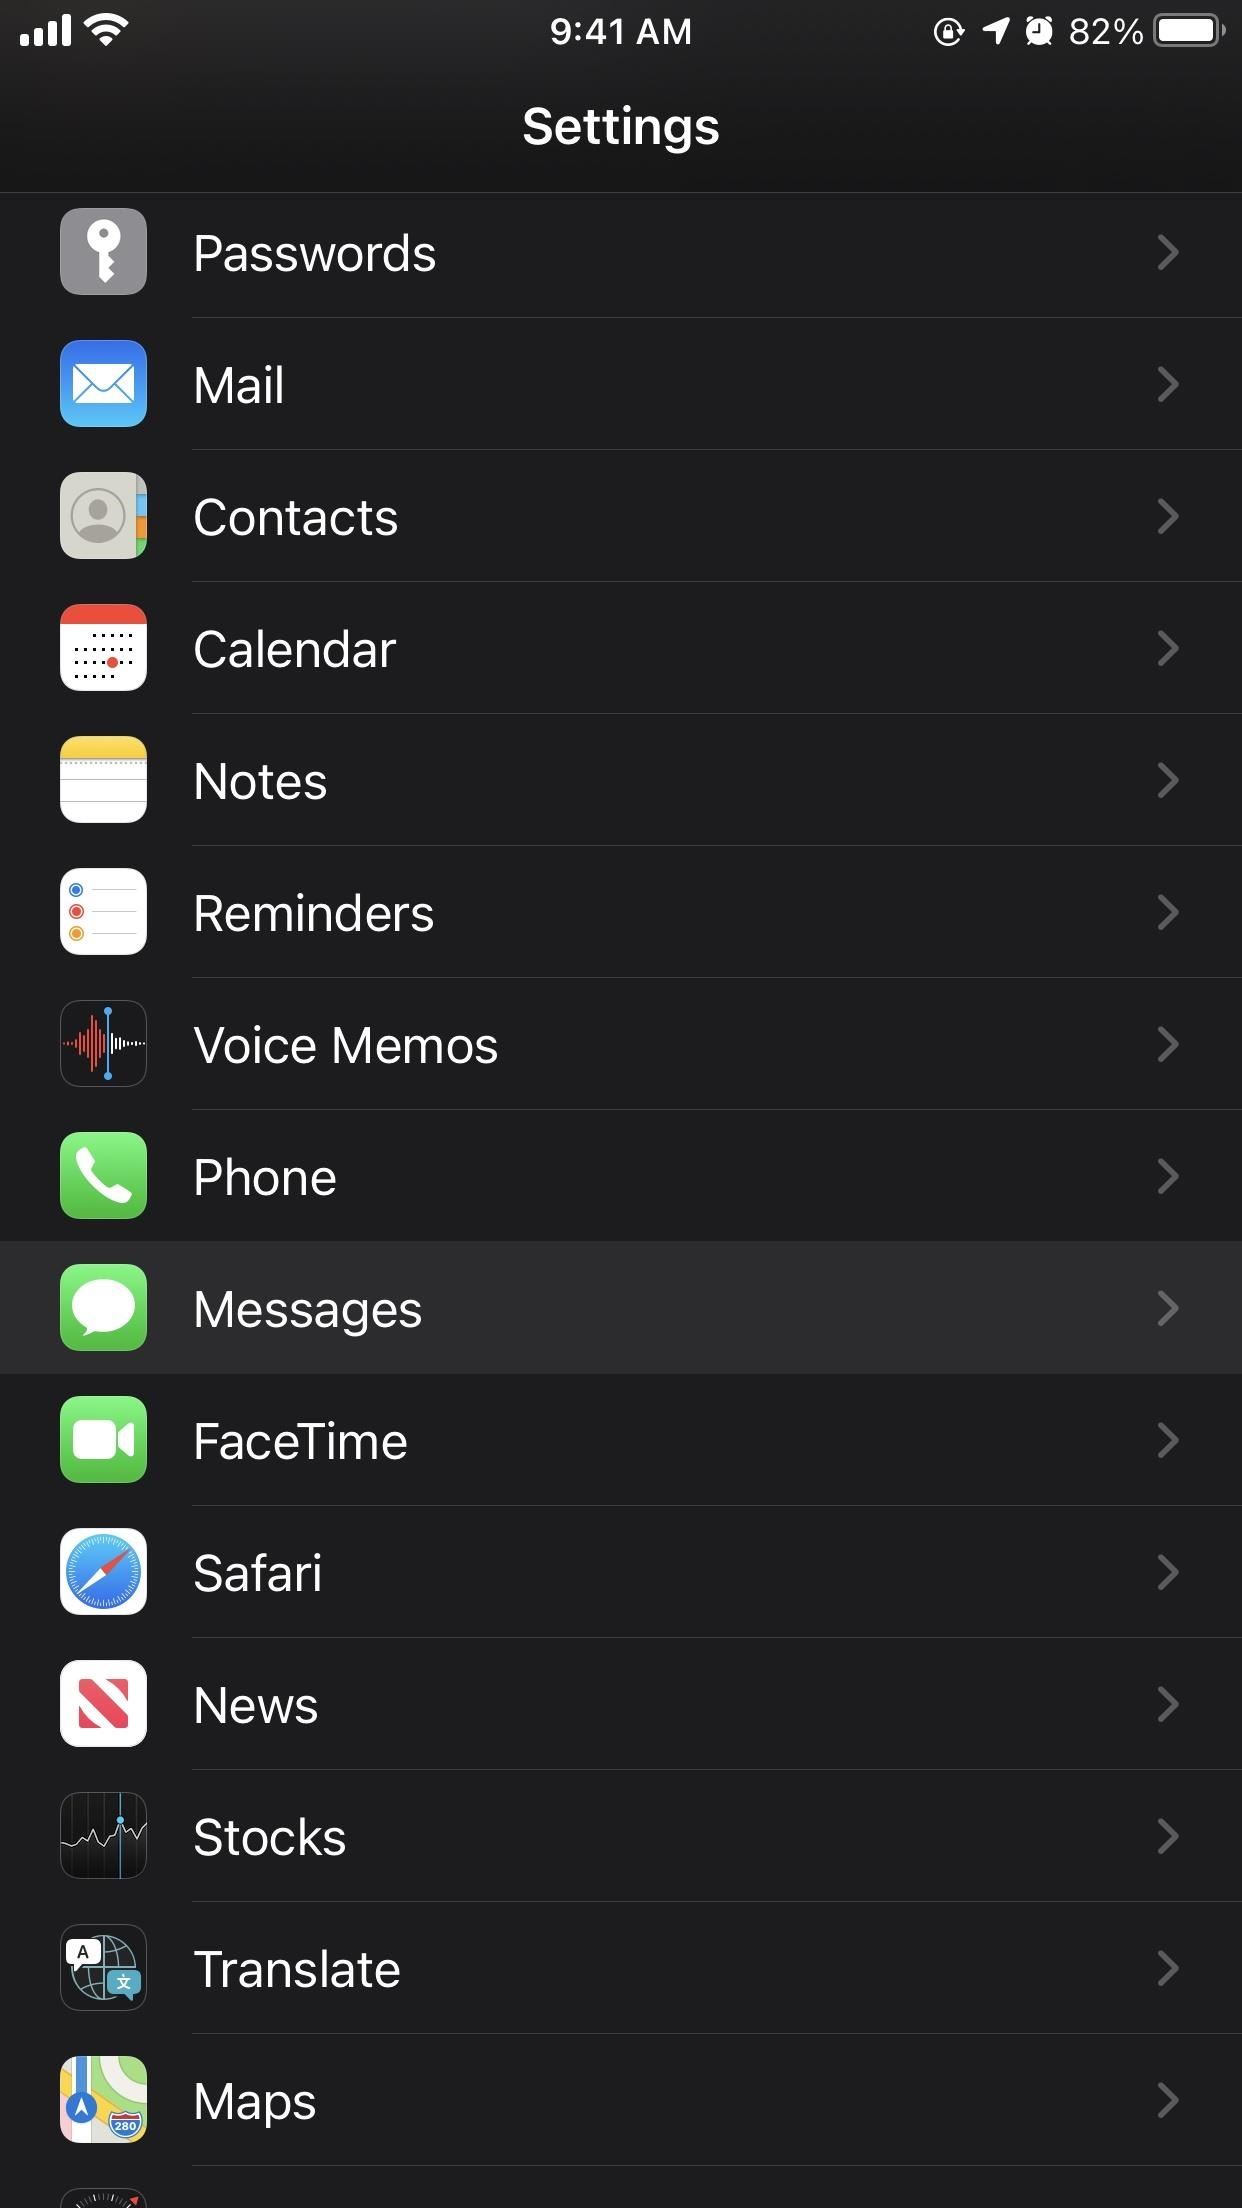 Eliminate Unwanted Texts & iMessages on Your iPhone to Avoid Spam, Scams & Phishing Attacks